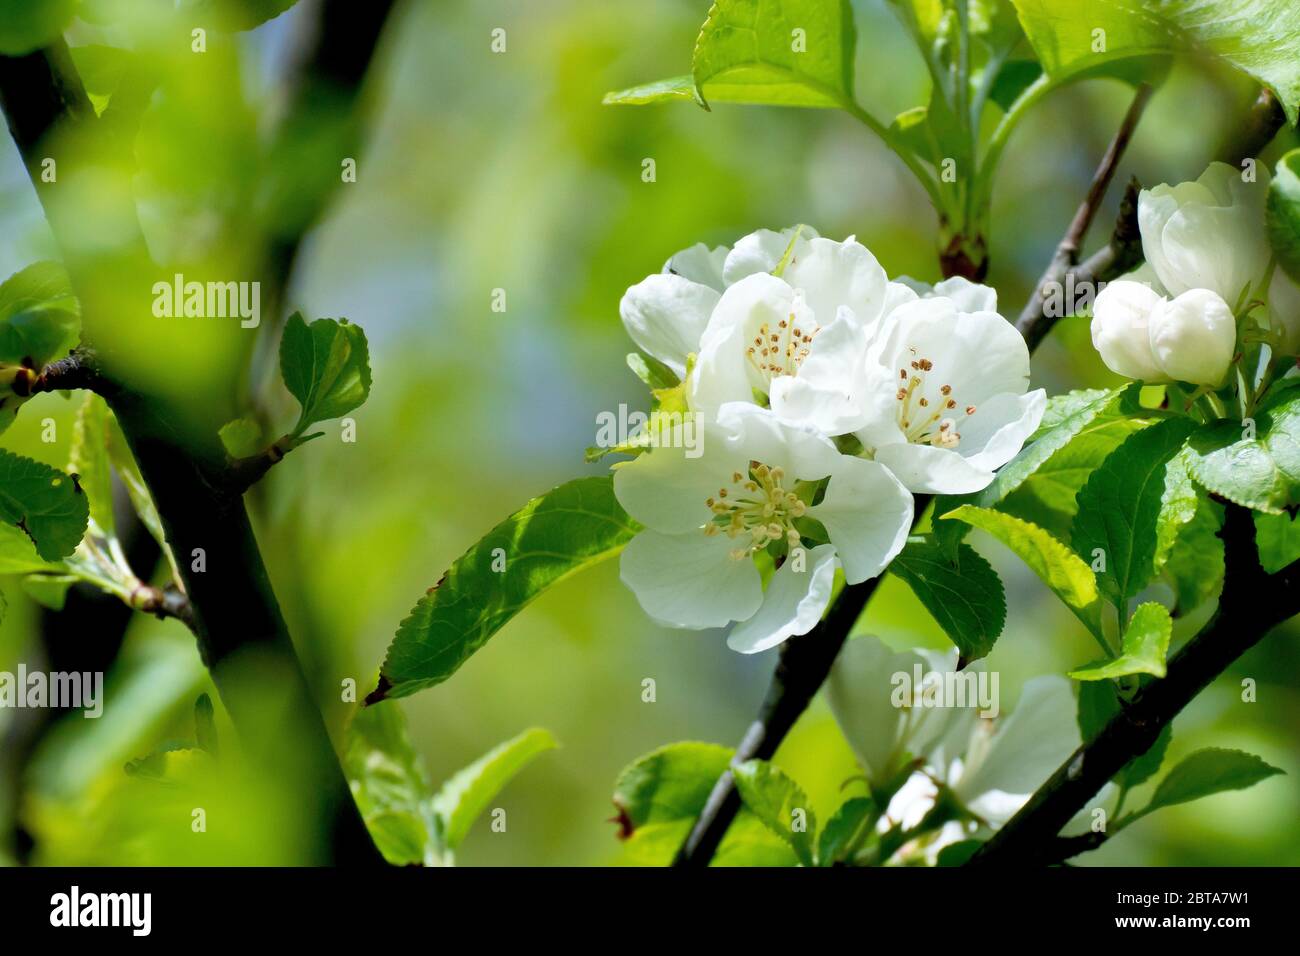 Crab Apple blossom (malus sylvestris), close up showing a spray of flowers in the branches of a tree. Stock Photo